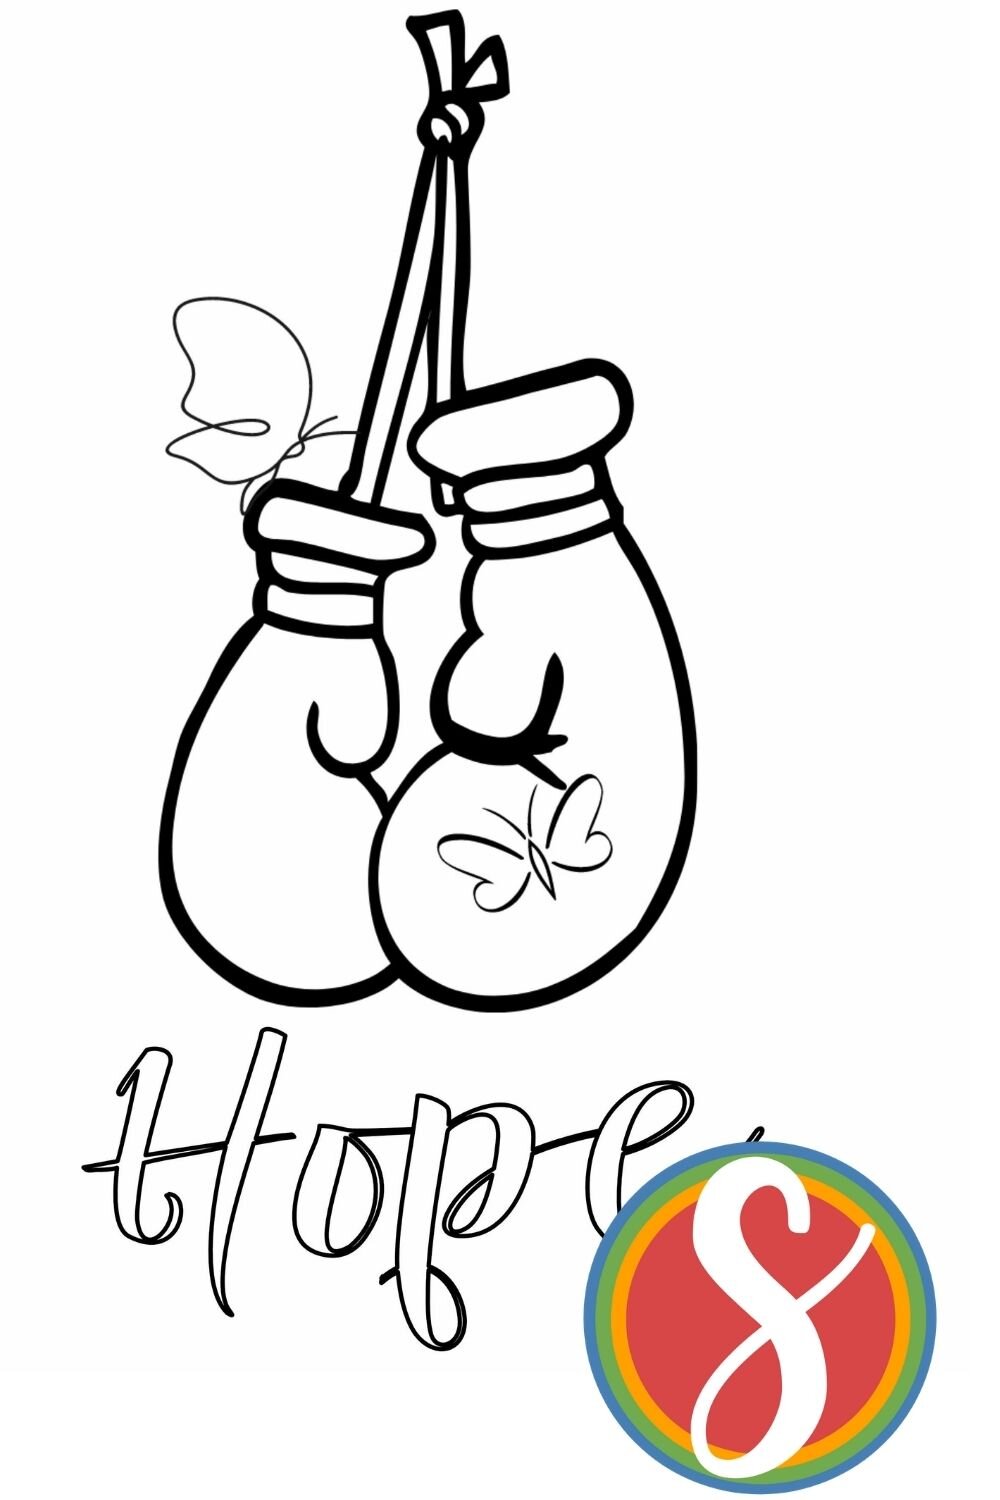 Boxing gloves and butterflies with Hope - a dragnet awareness coloring page - free from Stevie Doodles